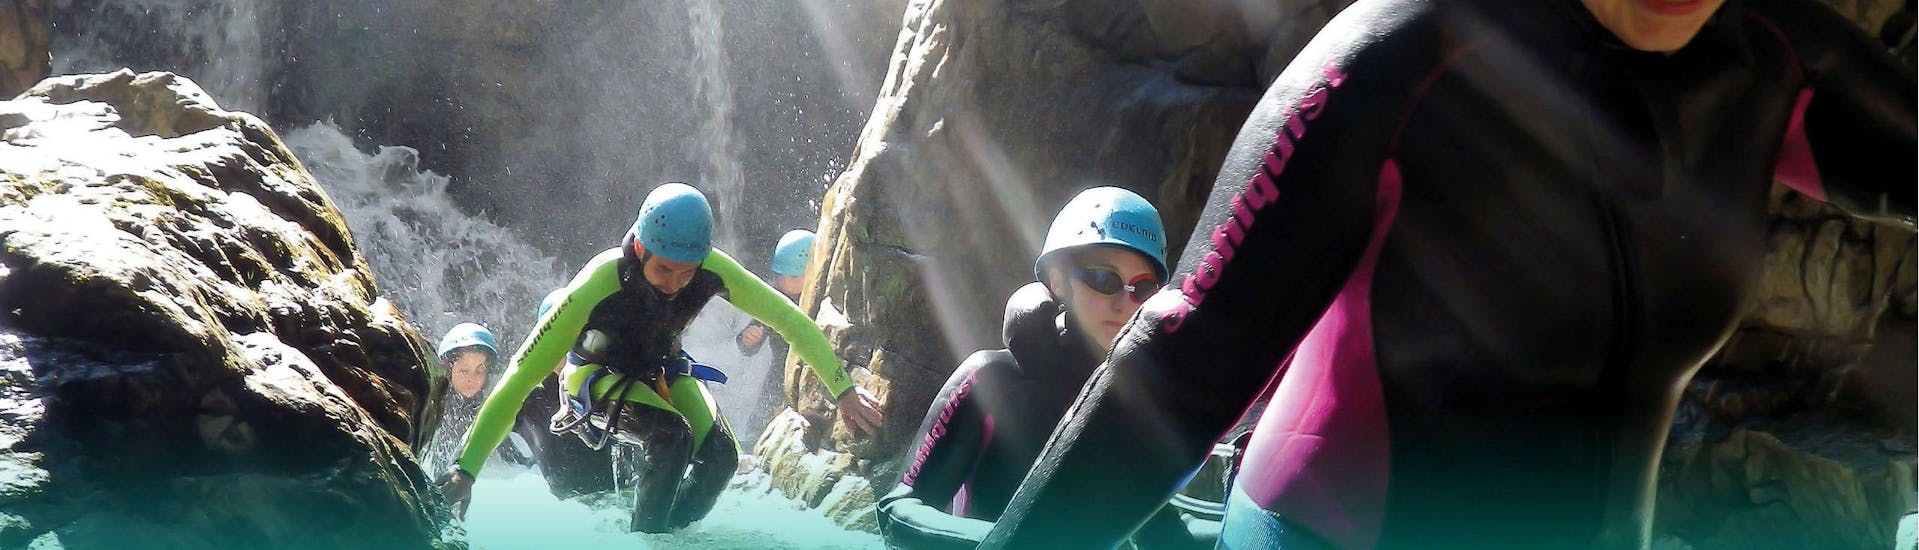 Canyoning facile a Ainet.